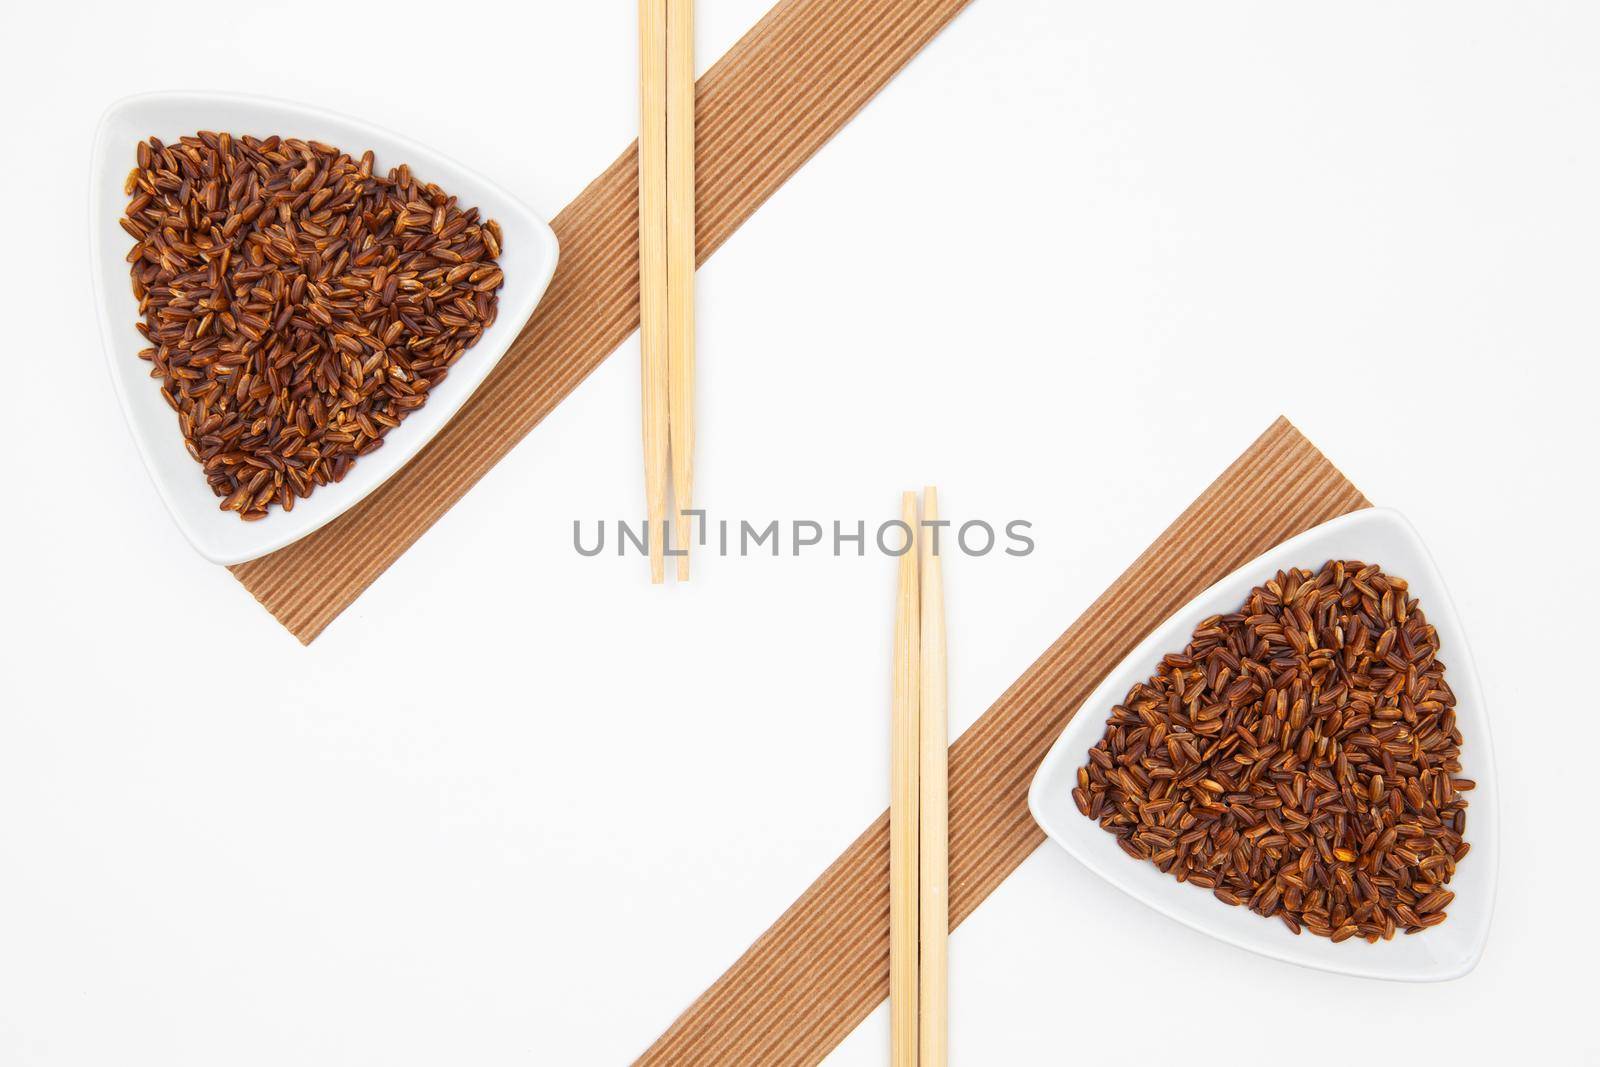 Top View Of White Sushi Plate With Rise And Chopsticks. Symmetry Food Design